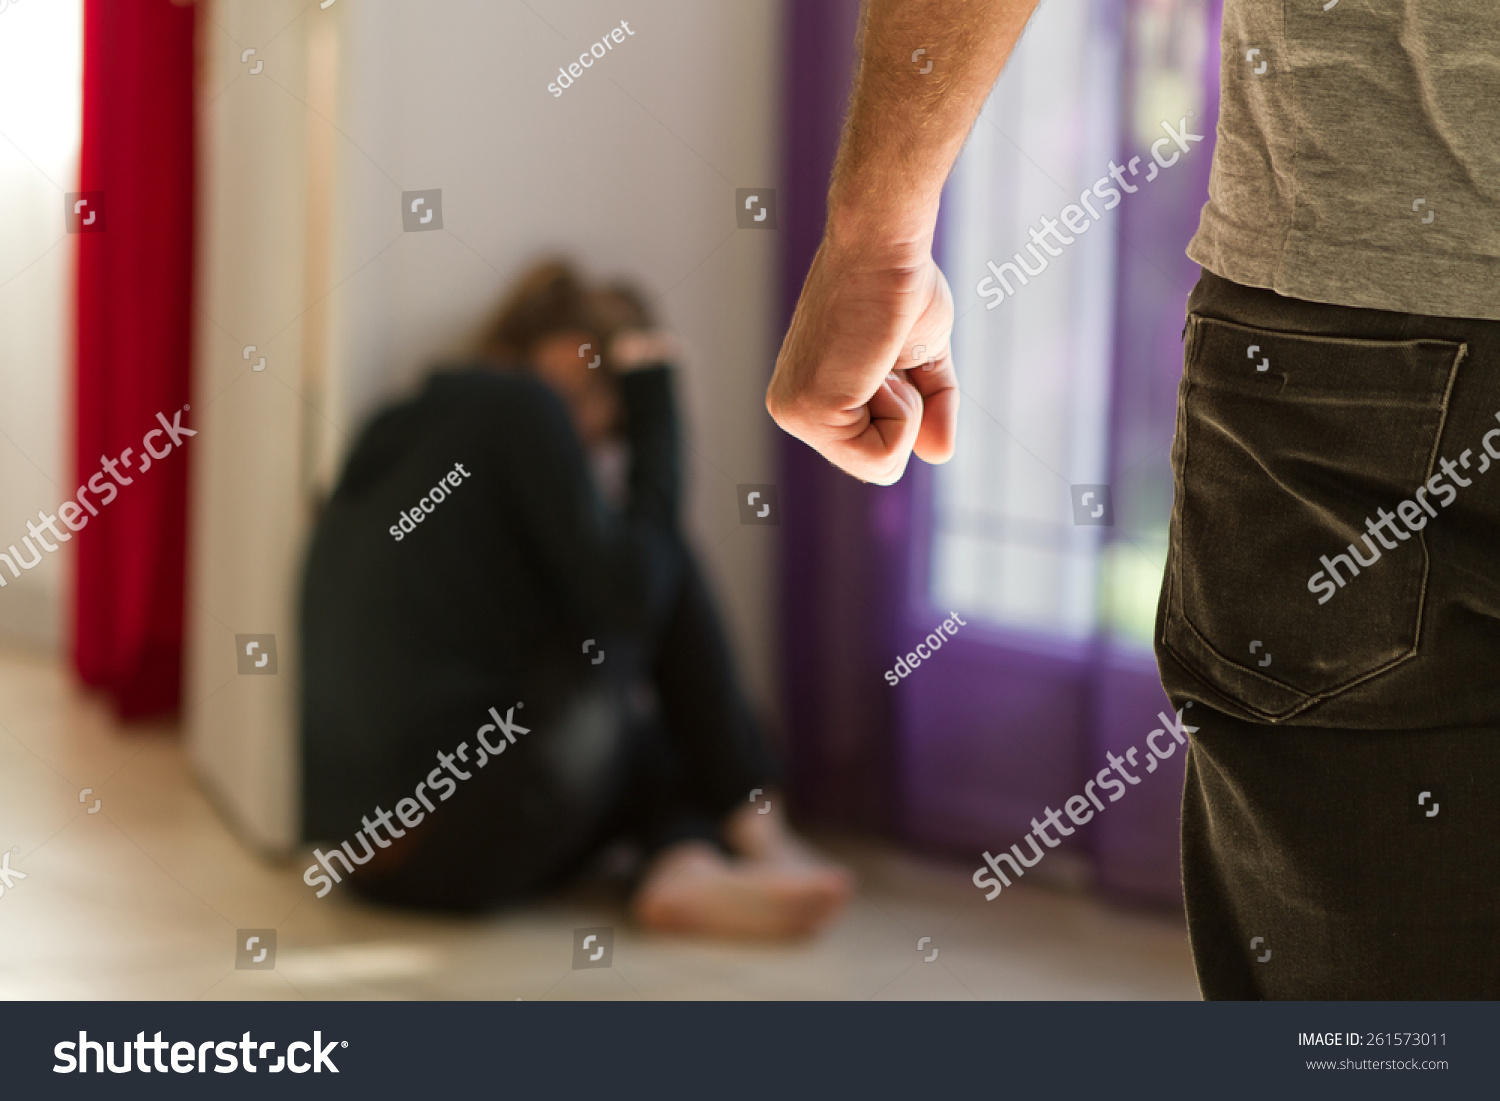 Man beating up his wife illustrating domestic violence #261573011